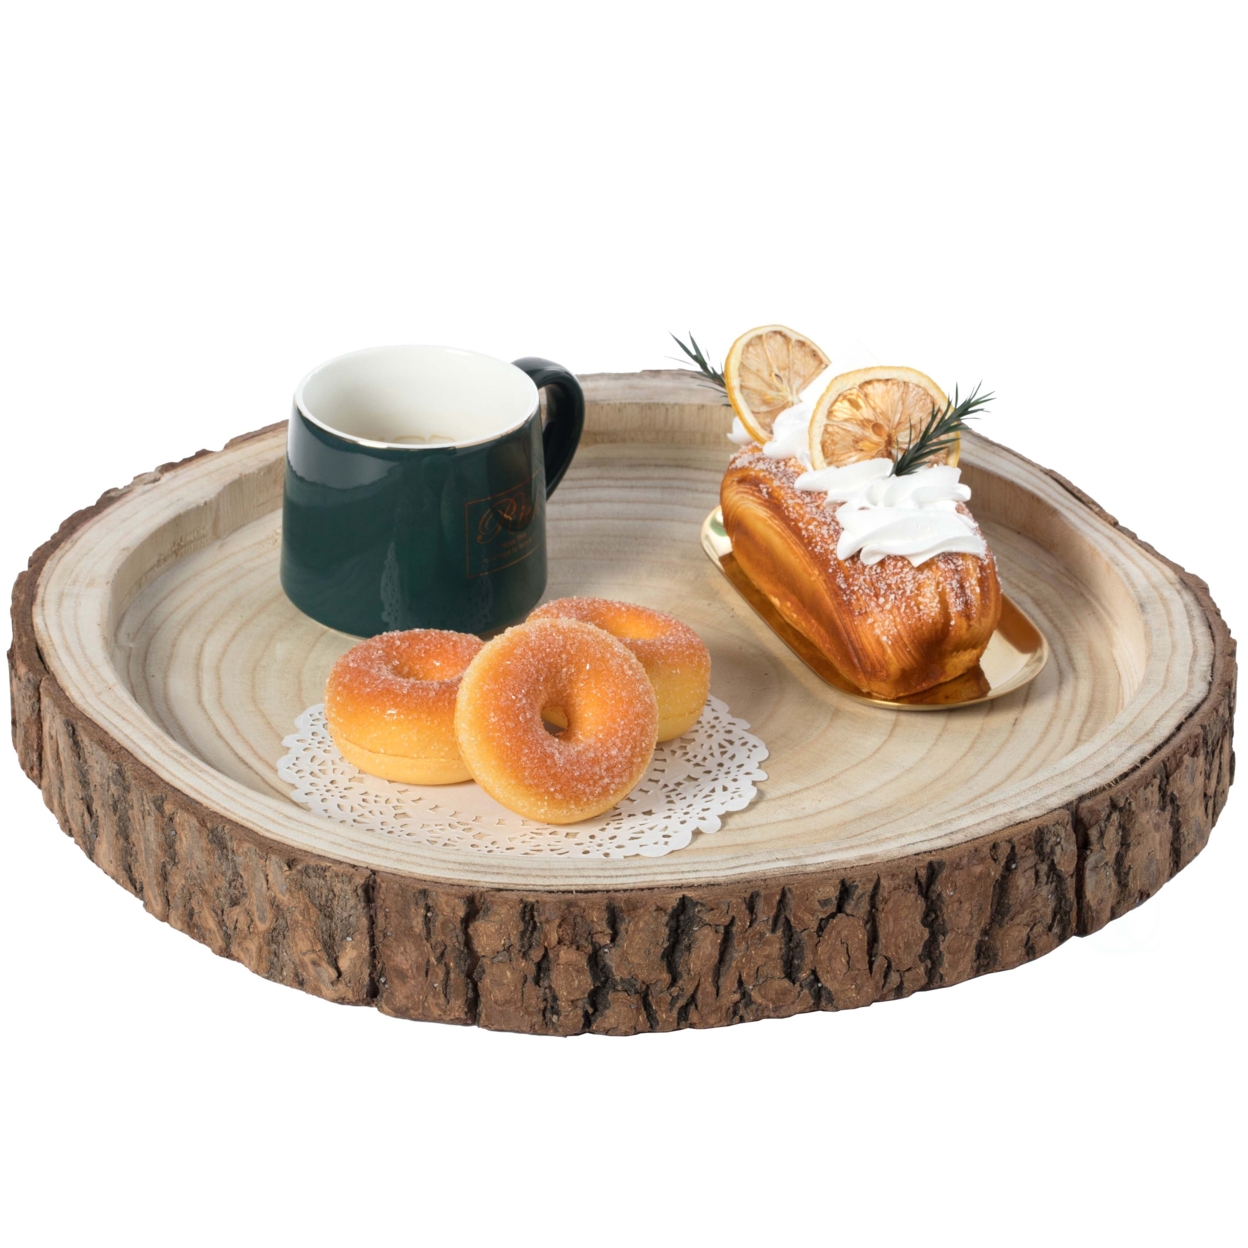 Wood Tree Bark Indented Display Tray Serving Plate Platter Charger - 16 Diameter